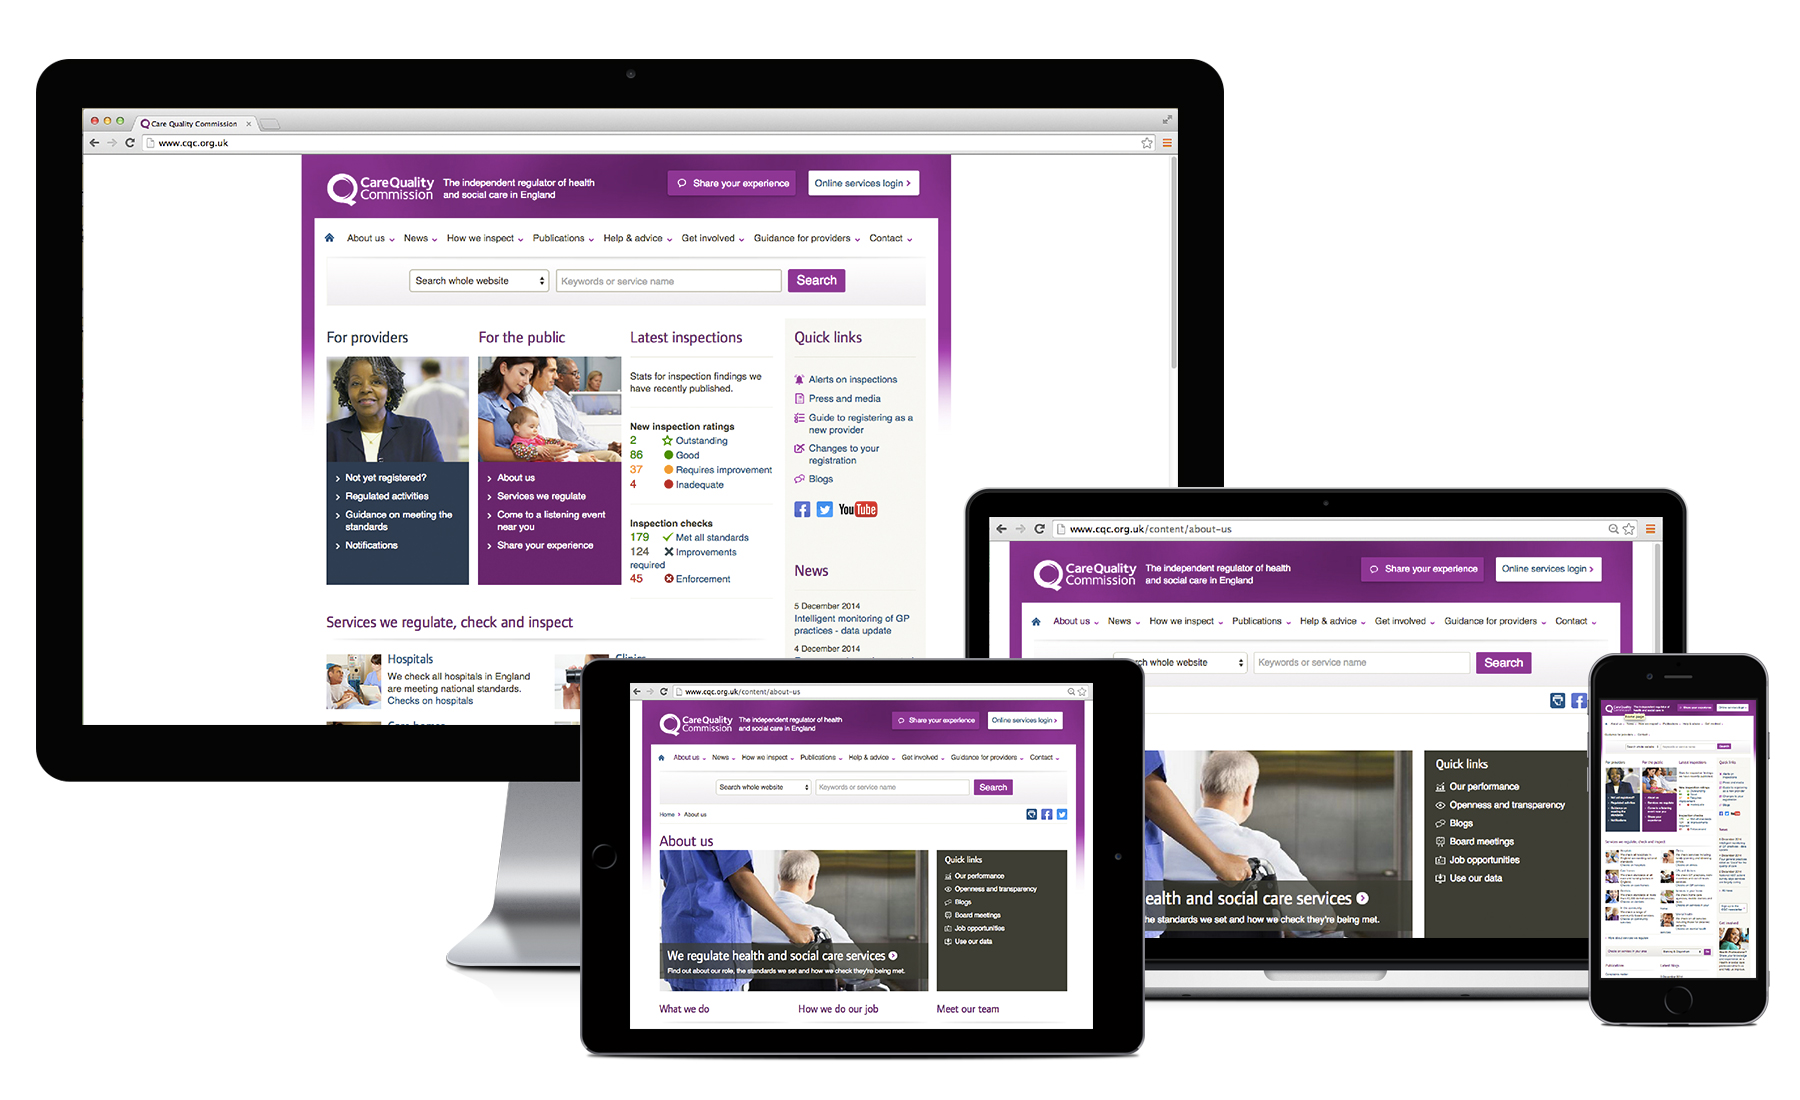 Desktop, Macbook, tablet and iPhone showing pages from Care Quality Commissions' website